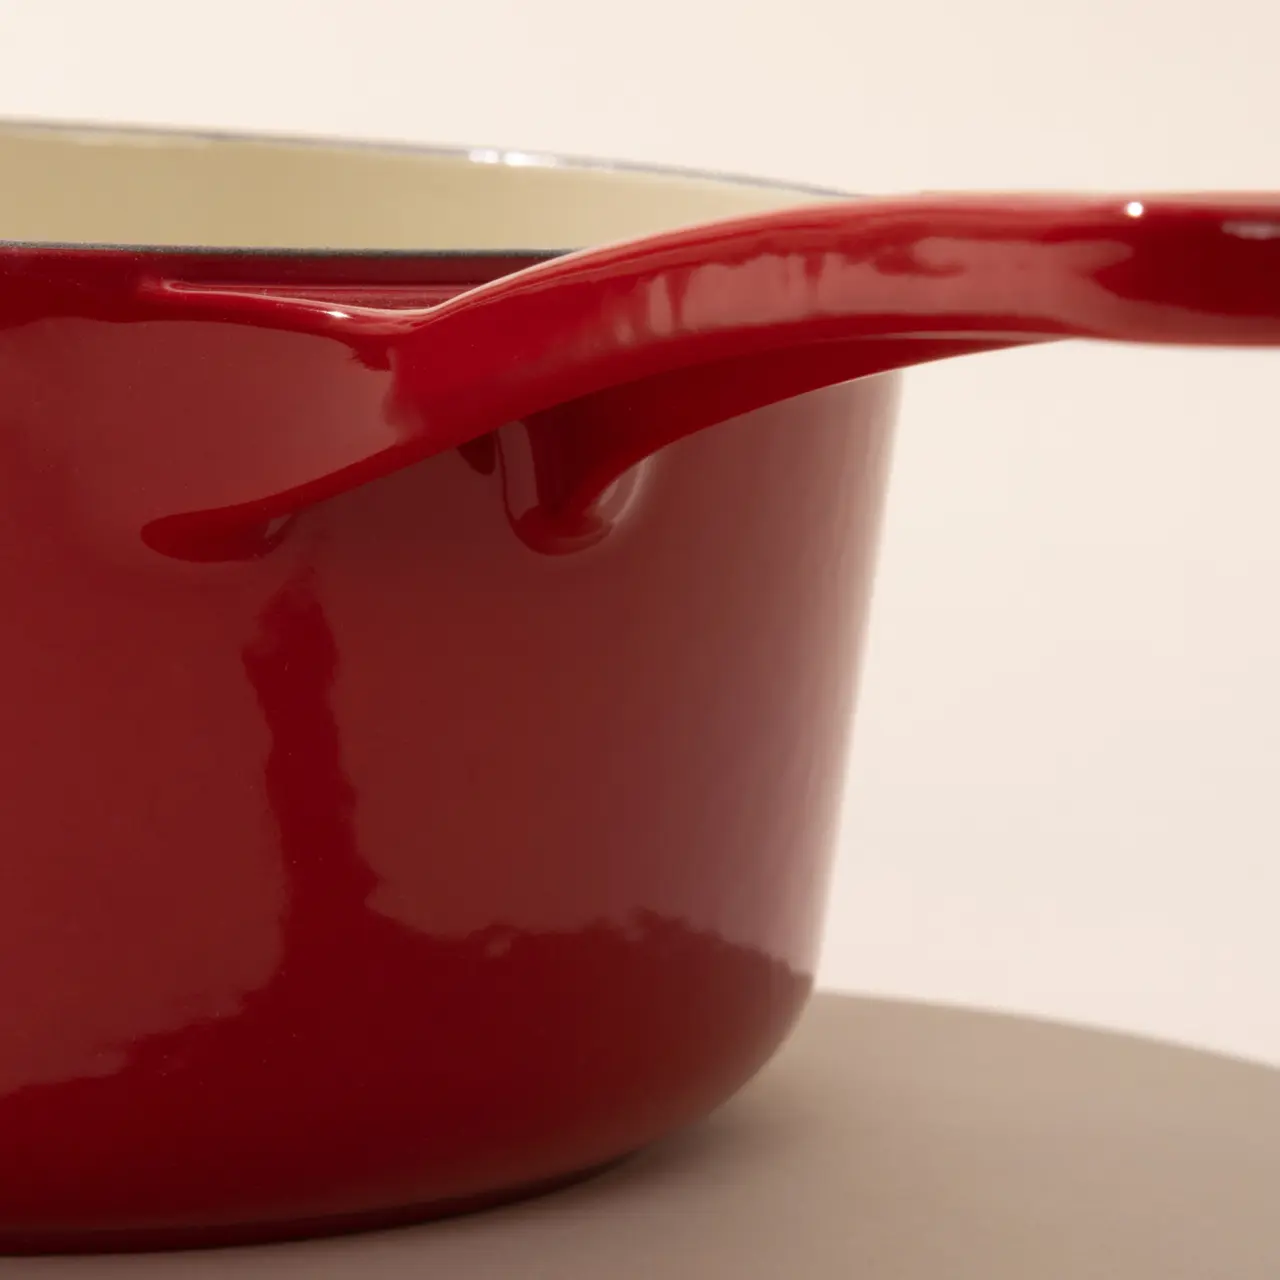 enameled cast iron saucepan made in red handle detail